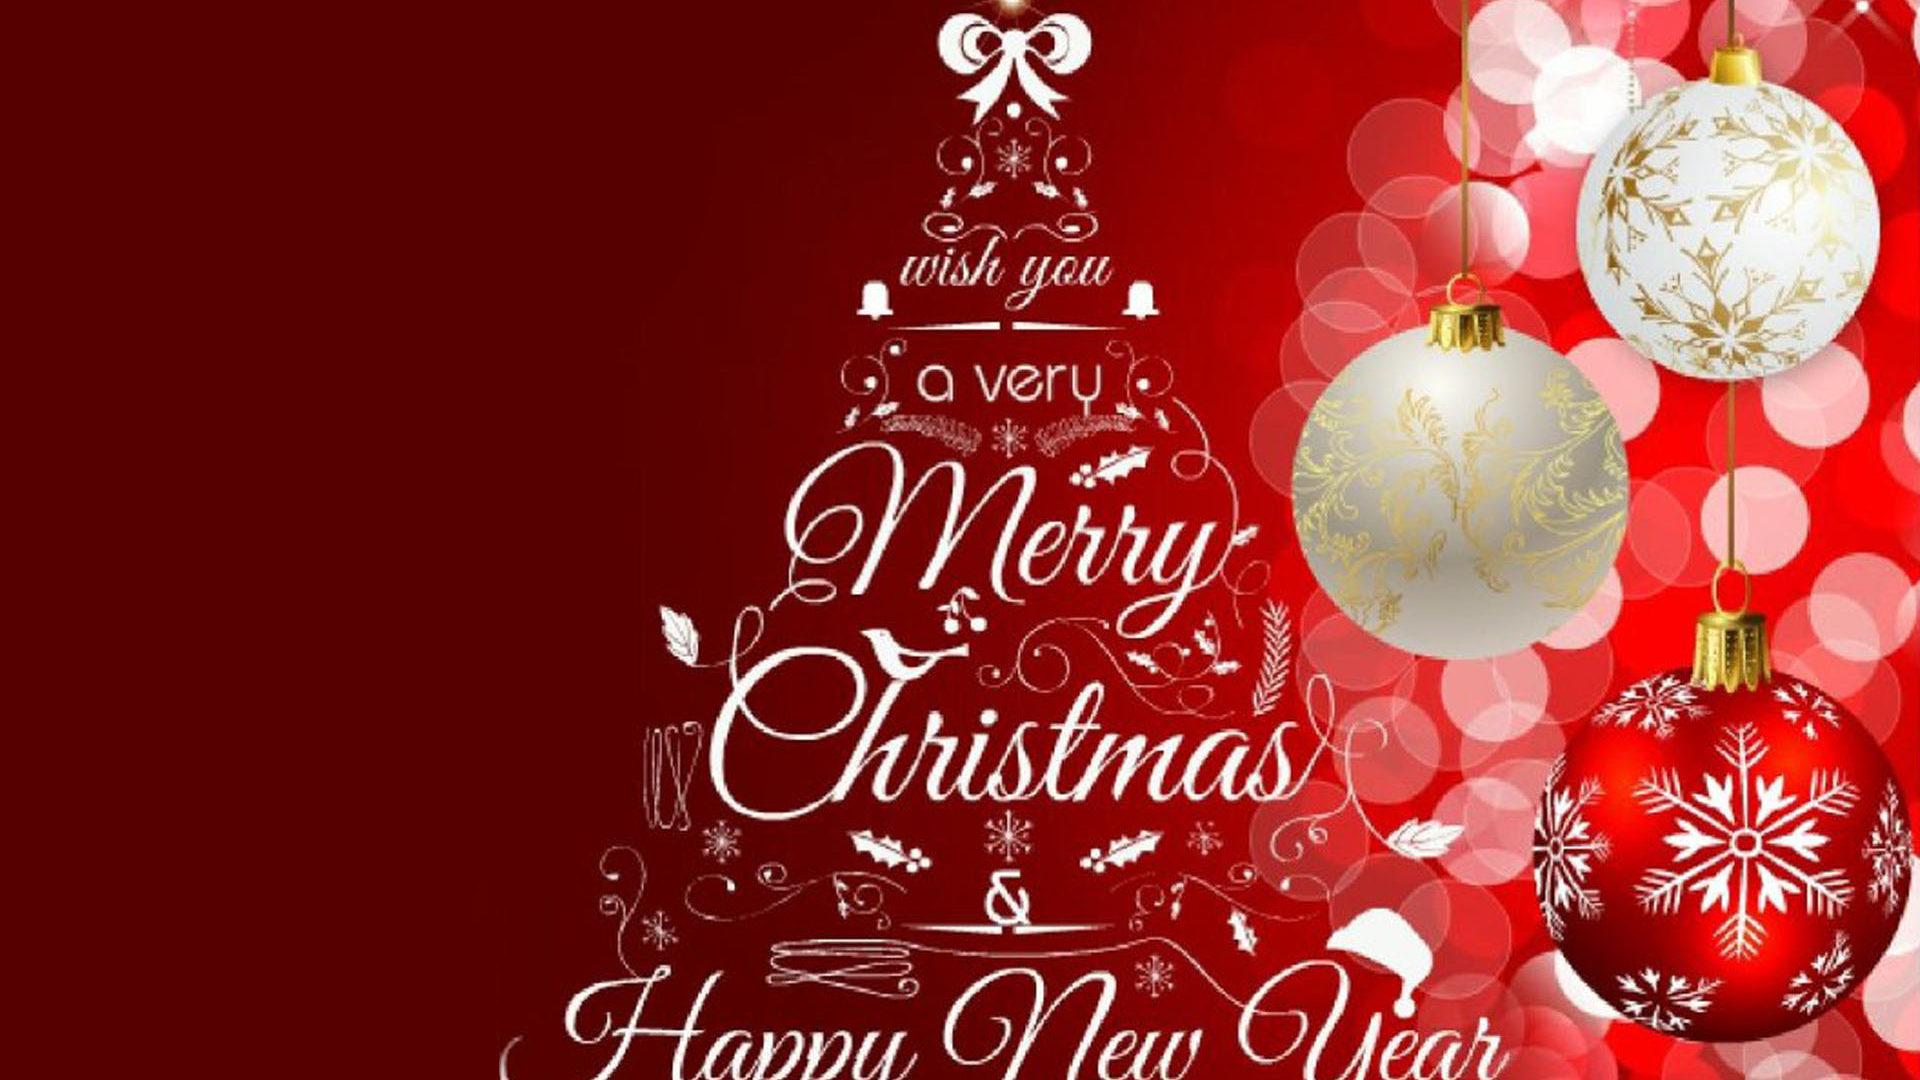 Greeting Card Merry Christmas And Happy New Year 2020 Image